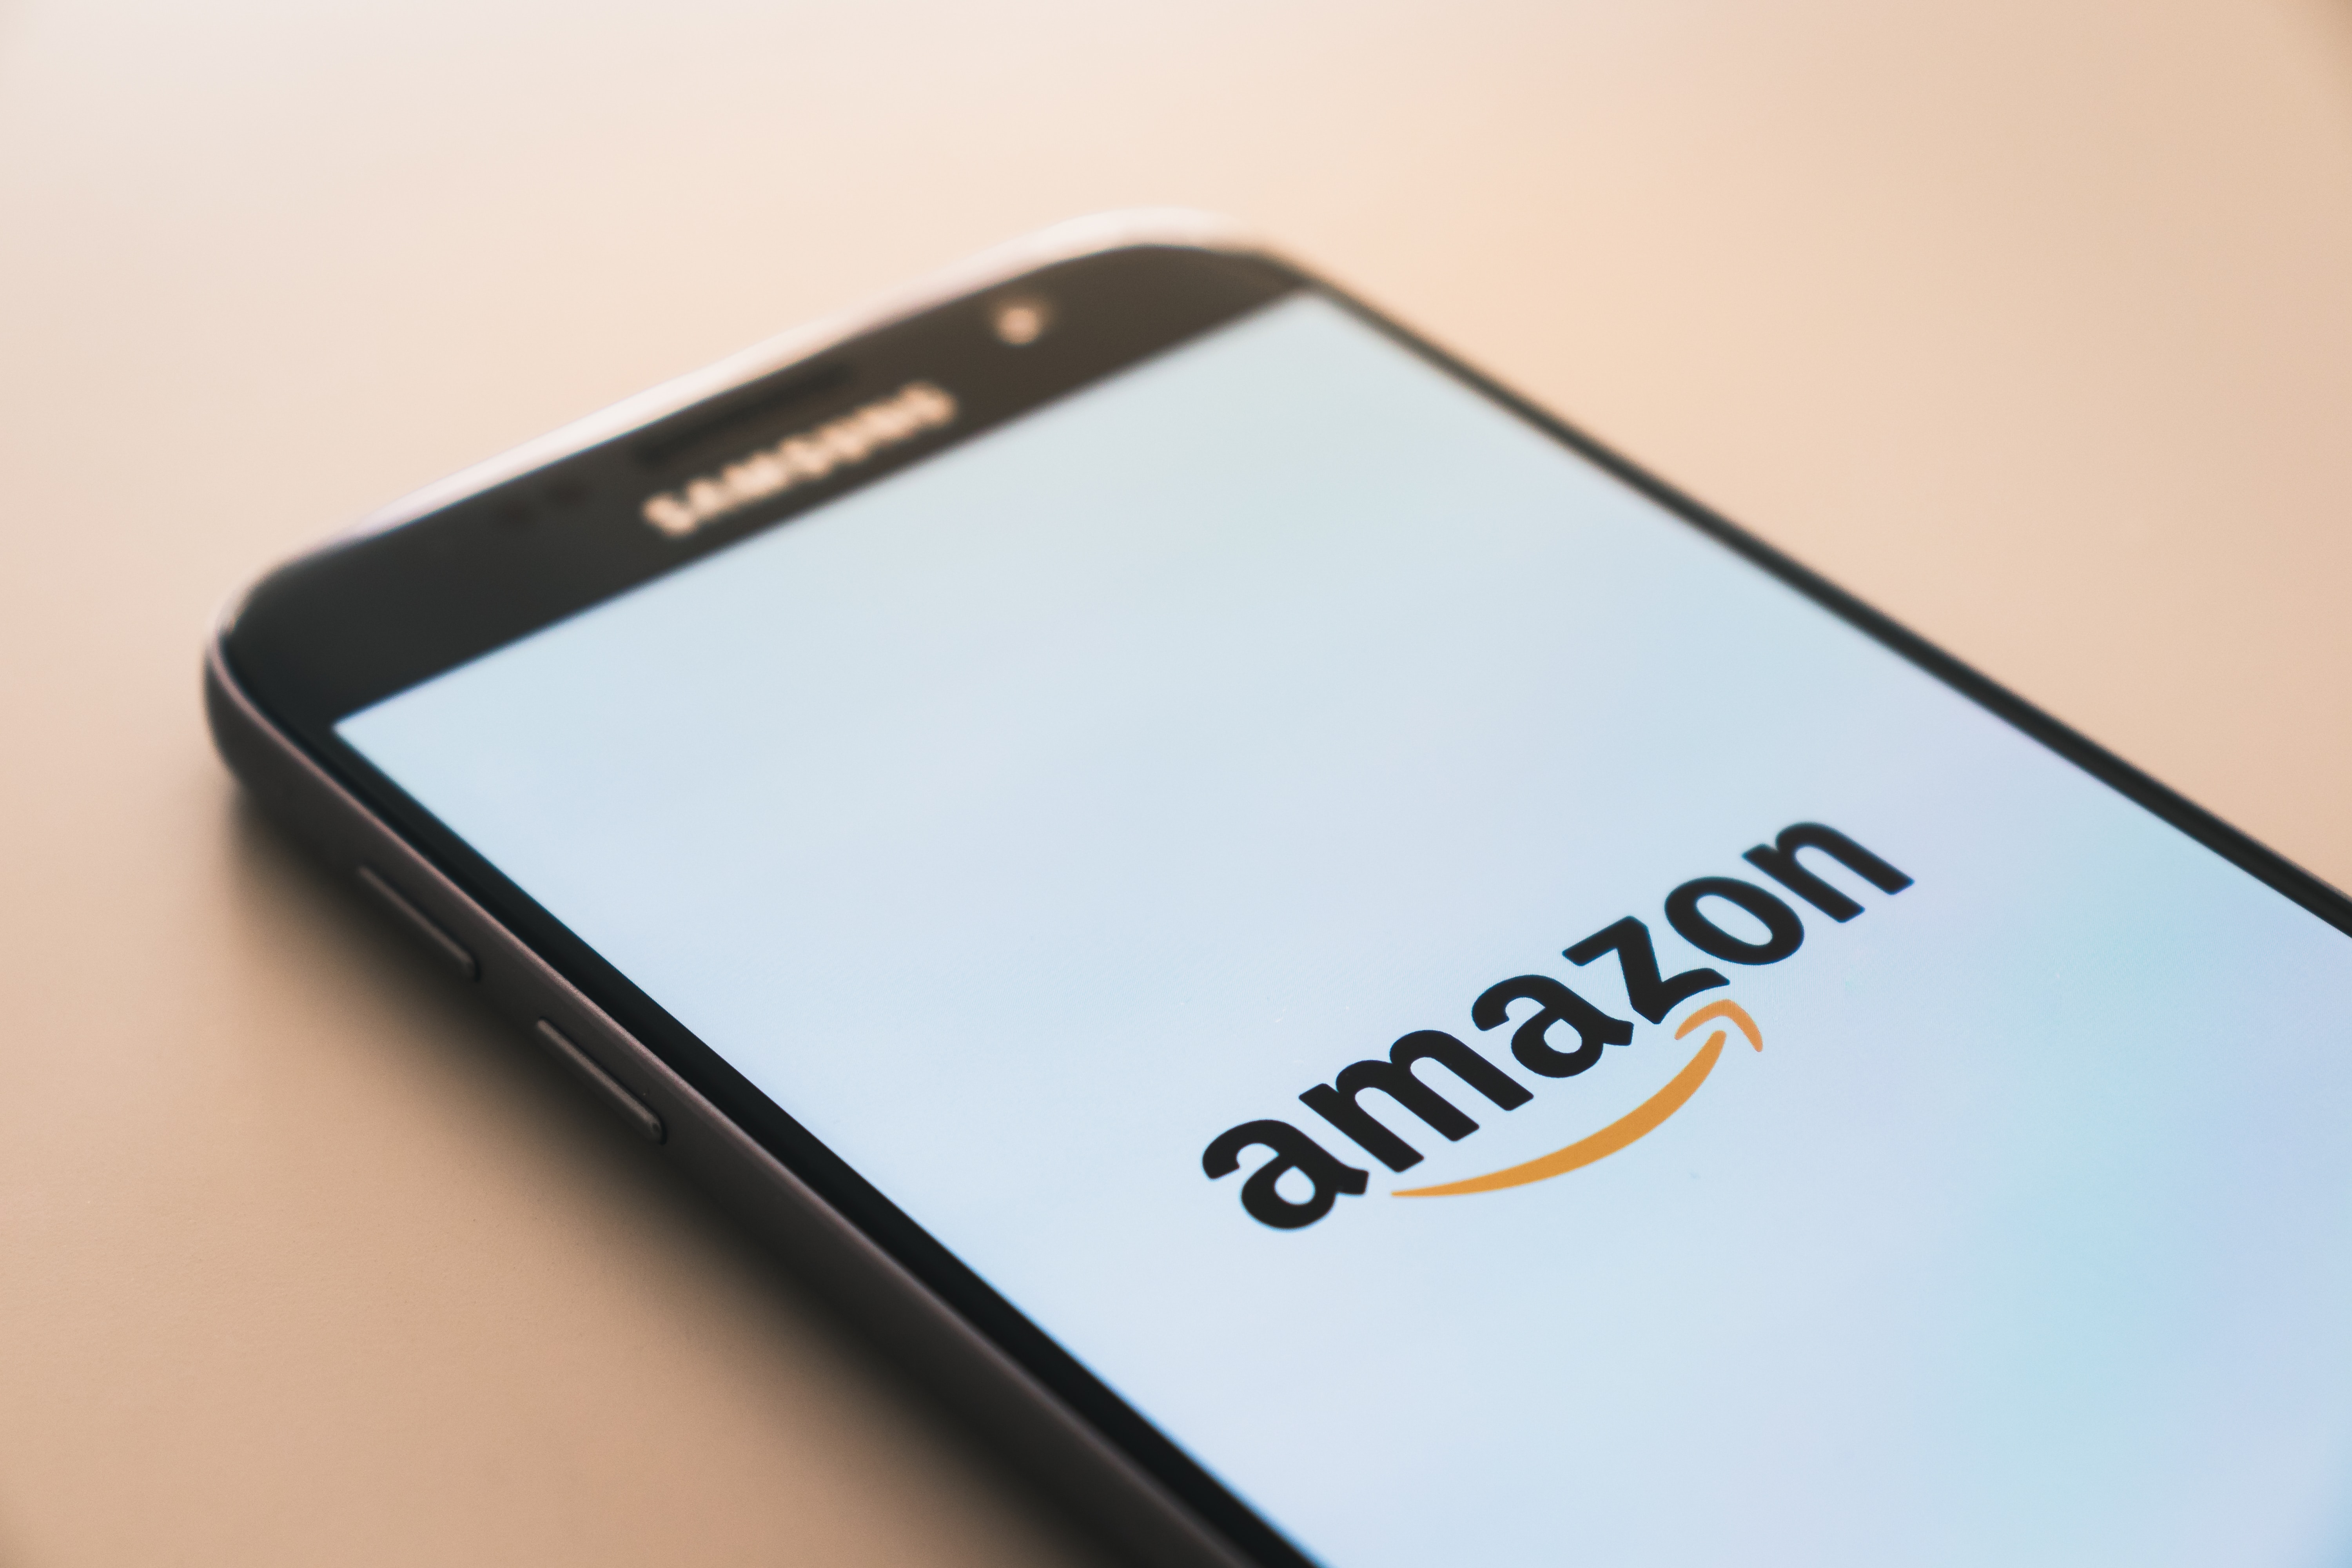 the Amazon app loading on a mobile phone for a customer journey to begin